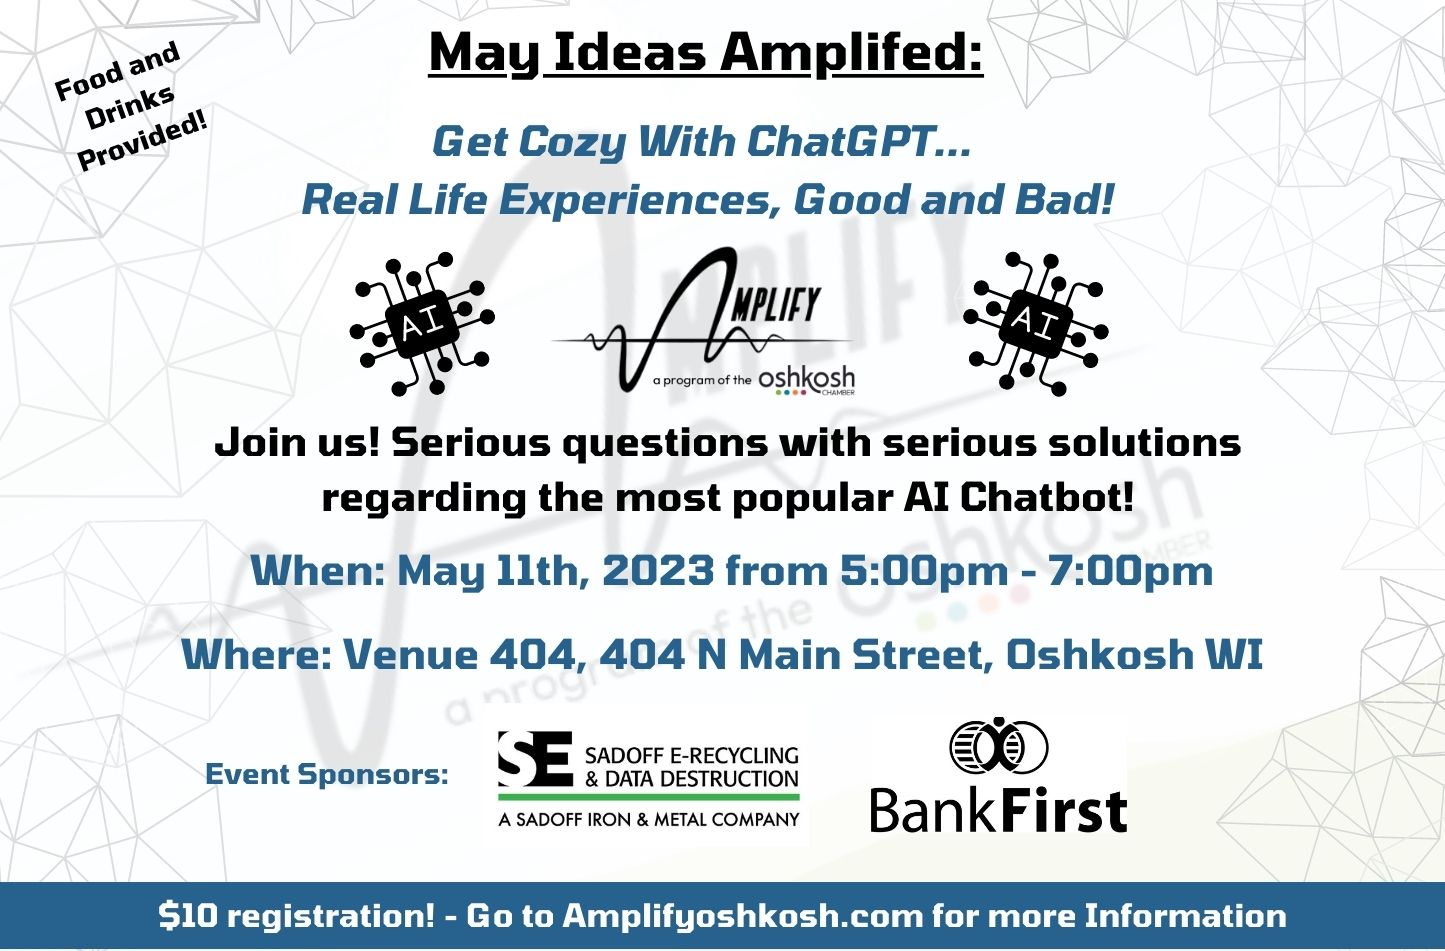 Amplify Oshkosh May Ideas Amplified – Get Cozy With ChatGPT!